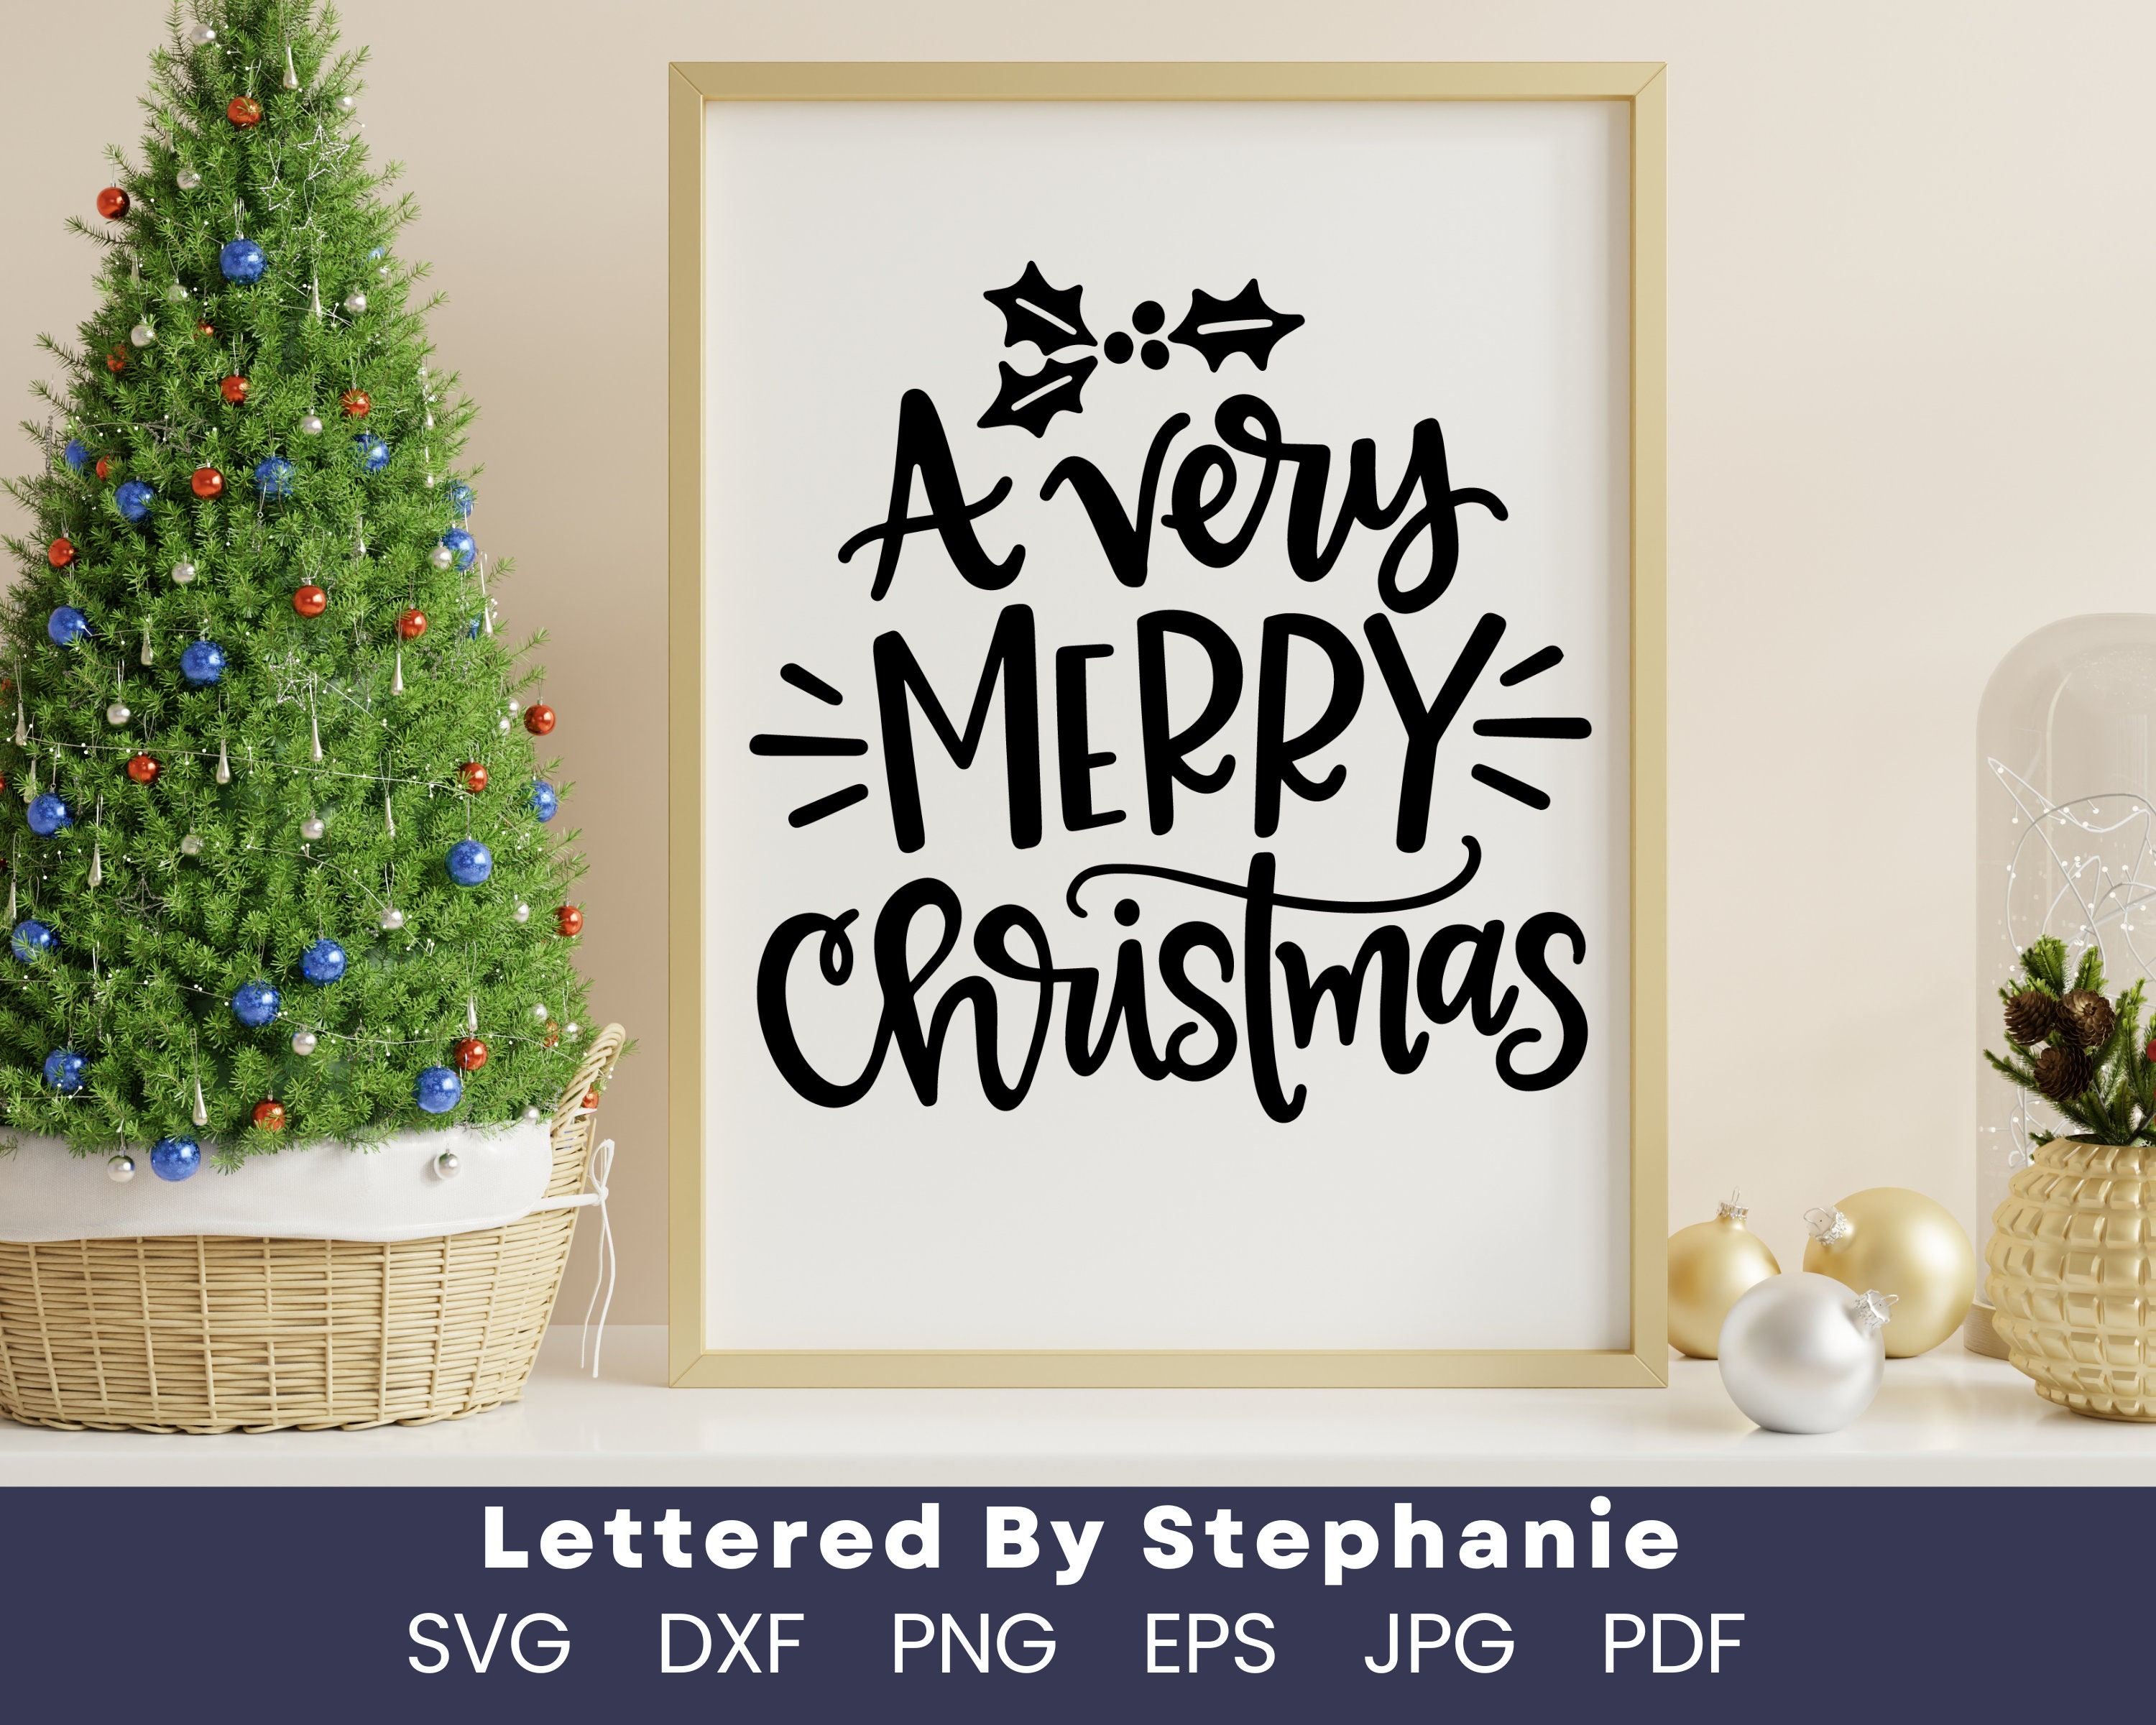 Very Merry Christmas Stickers – Brown Paper Crafts